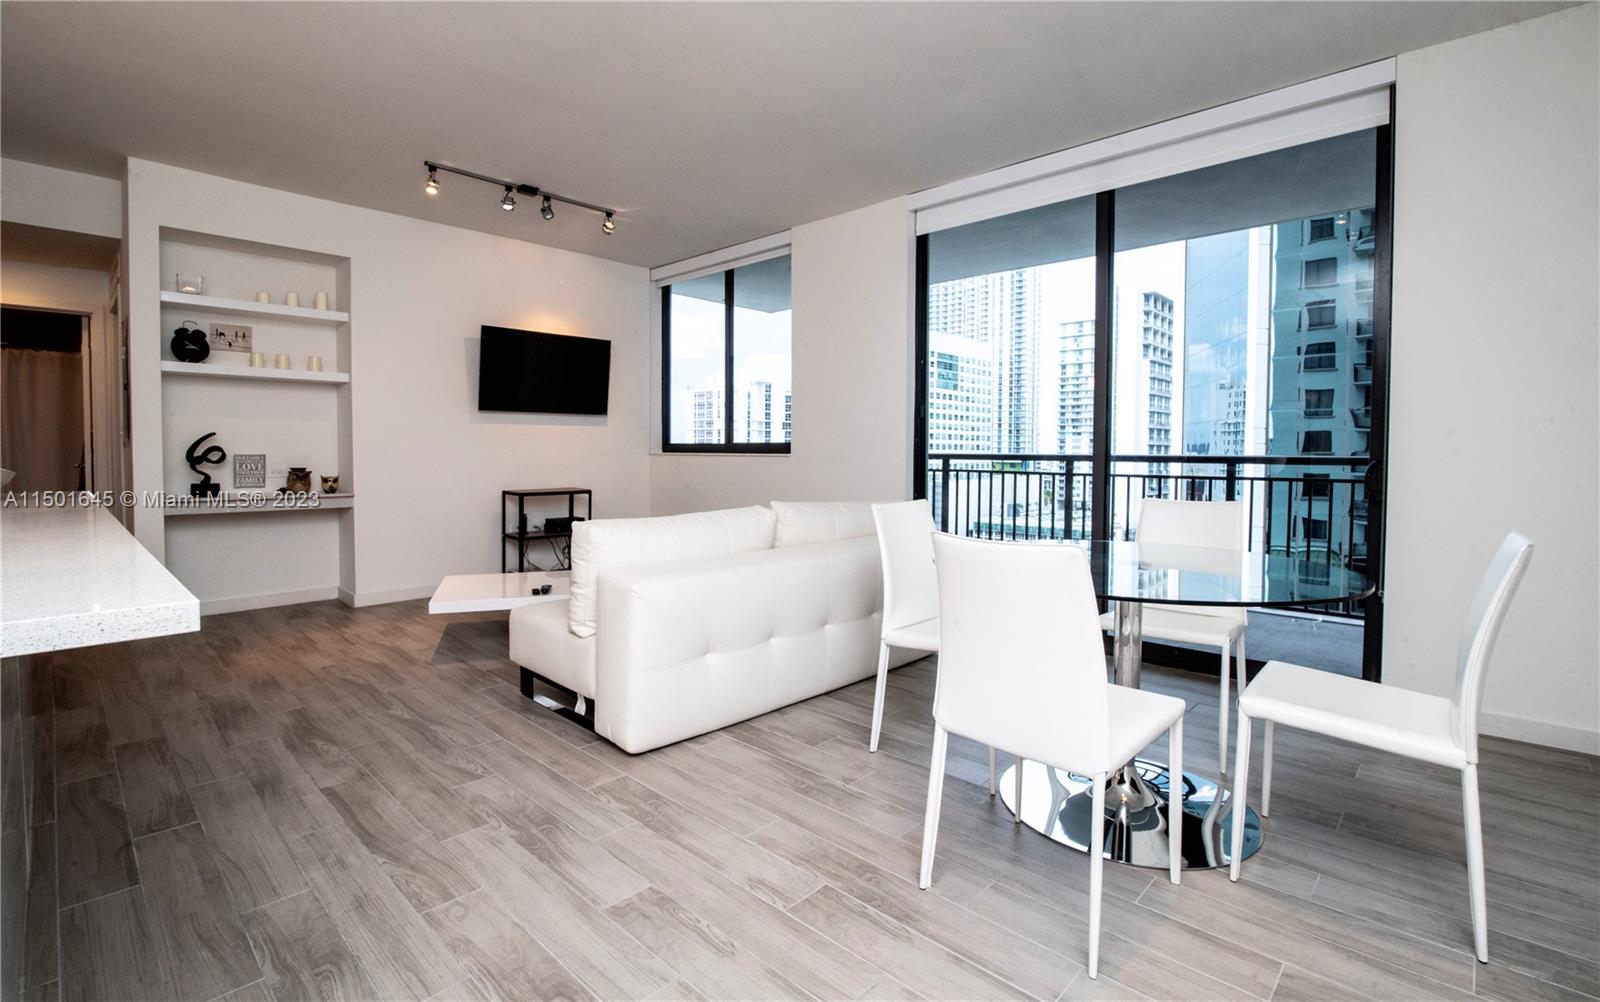 Beautiful and Modern 2 bedroom 2 bathroom Apartment in the heart of Brickell. Fully Furnished with Italian imported furniture pieces. Stunning views of the city, open kitchen layout with quartz kitchen countertop and backsplash. Luxury amenities including Gym, BBQ, Children playroom & playground, Pool, Spa, Game/ Lounge Room, etc. Rent includes 1 assigned parking spot. For Showings please call or text listing agents with 24 hr notice!!!